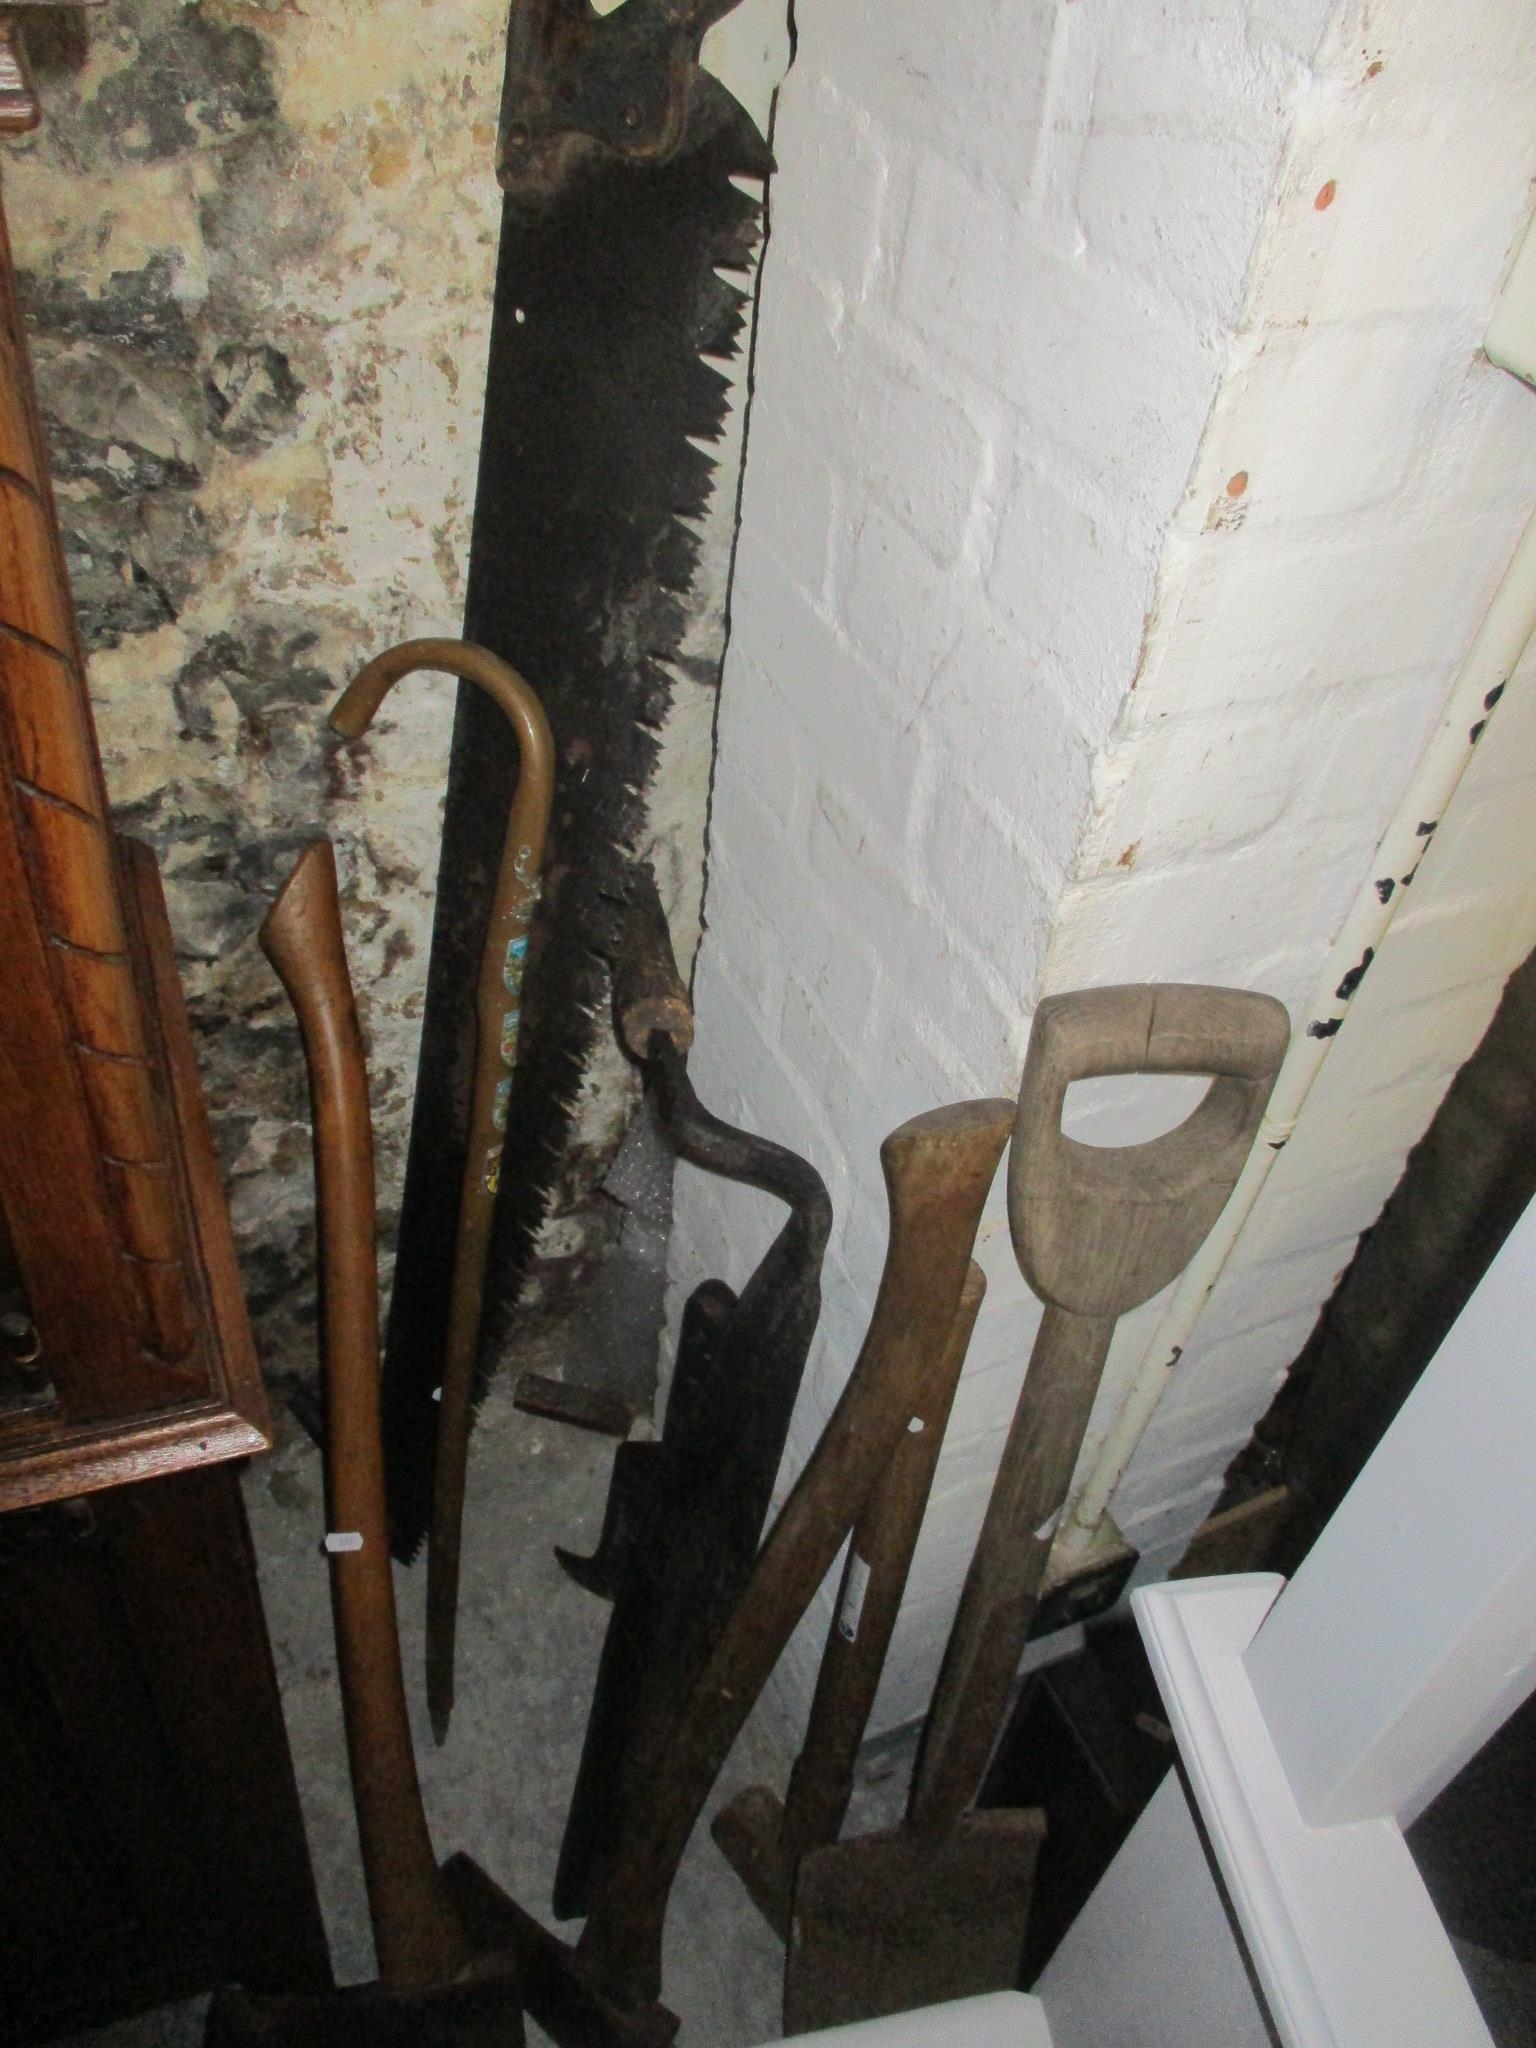 A mixed lot to include a saw, axe, walking stick and other items